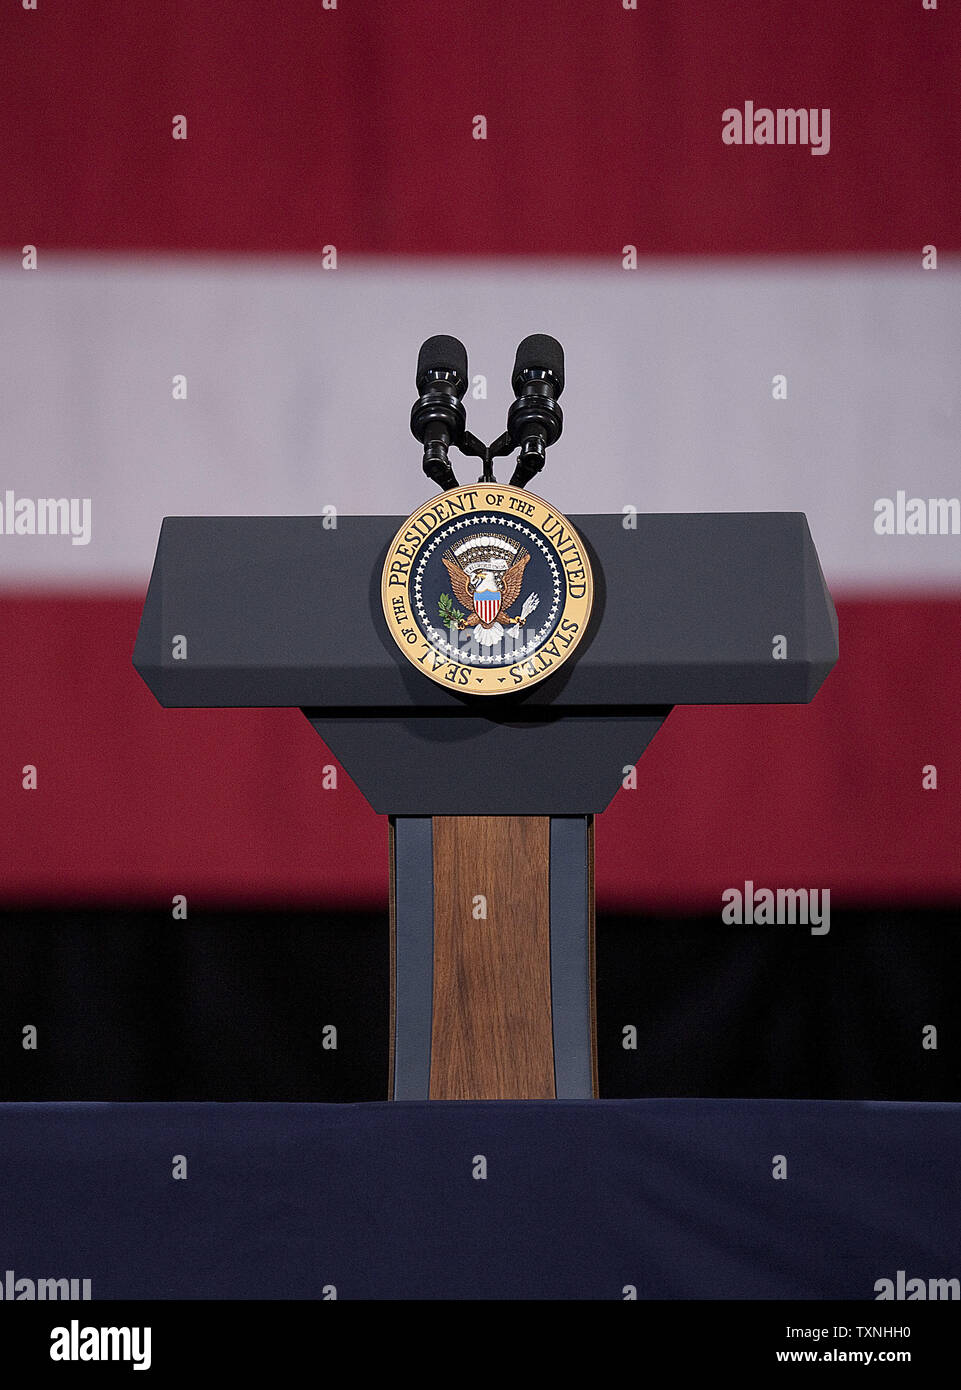 The Presidential Seal adorns the podium moments before President Barack Obama speaks at Buckley Air Force Base on January 26, 2012 in Aurora, Colorado.  President Obama is using his western trip to promote the broad ideas contained in his State of the Union Address to create jobs, improve education and teachers, and create incentives for renewable energy.  Colorado is a swing state critical to President Obama's re-election in November.     UPI/Gary C. Caskey Stock Photo